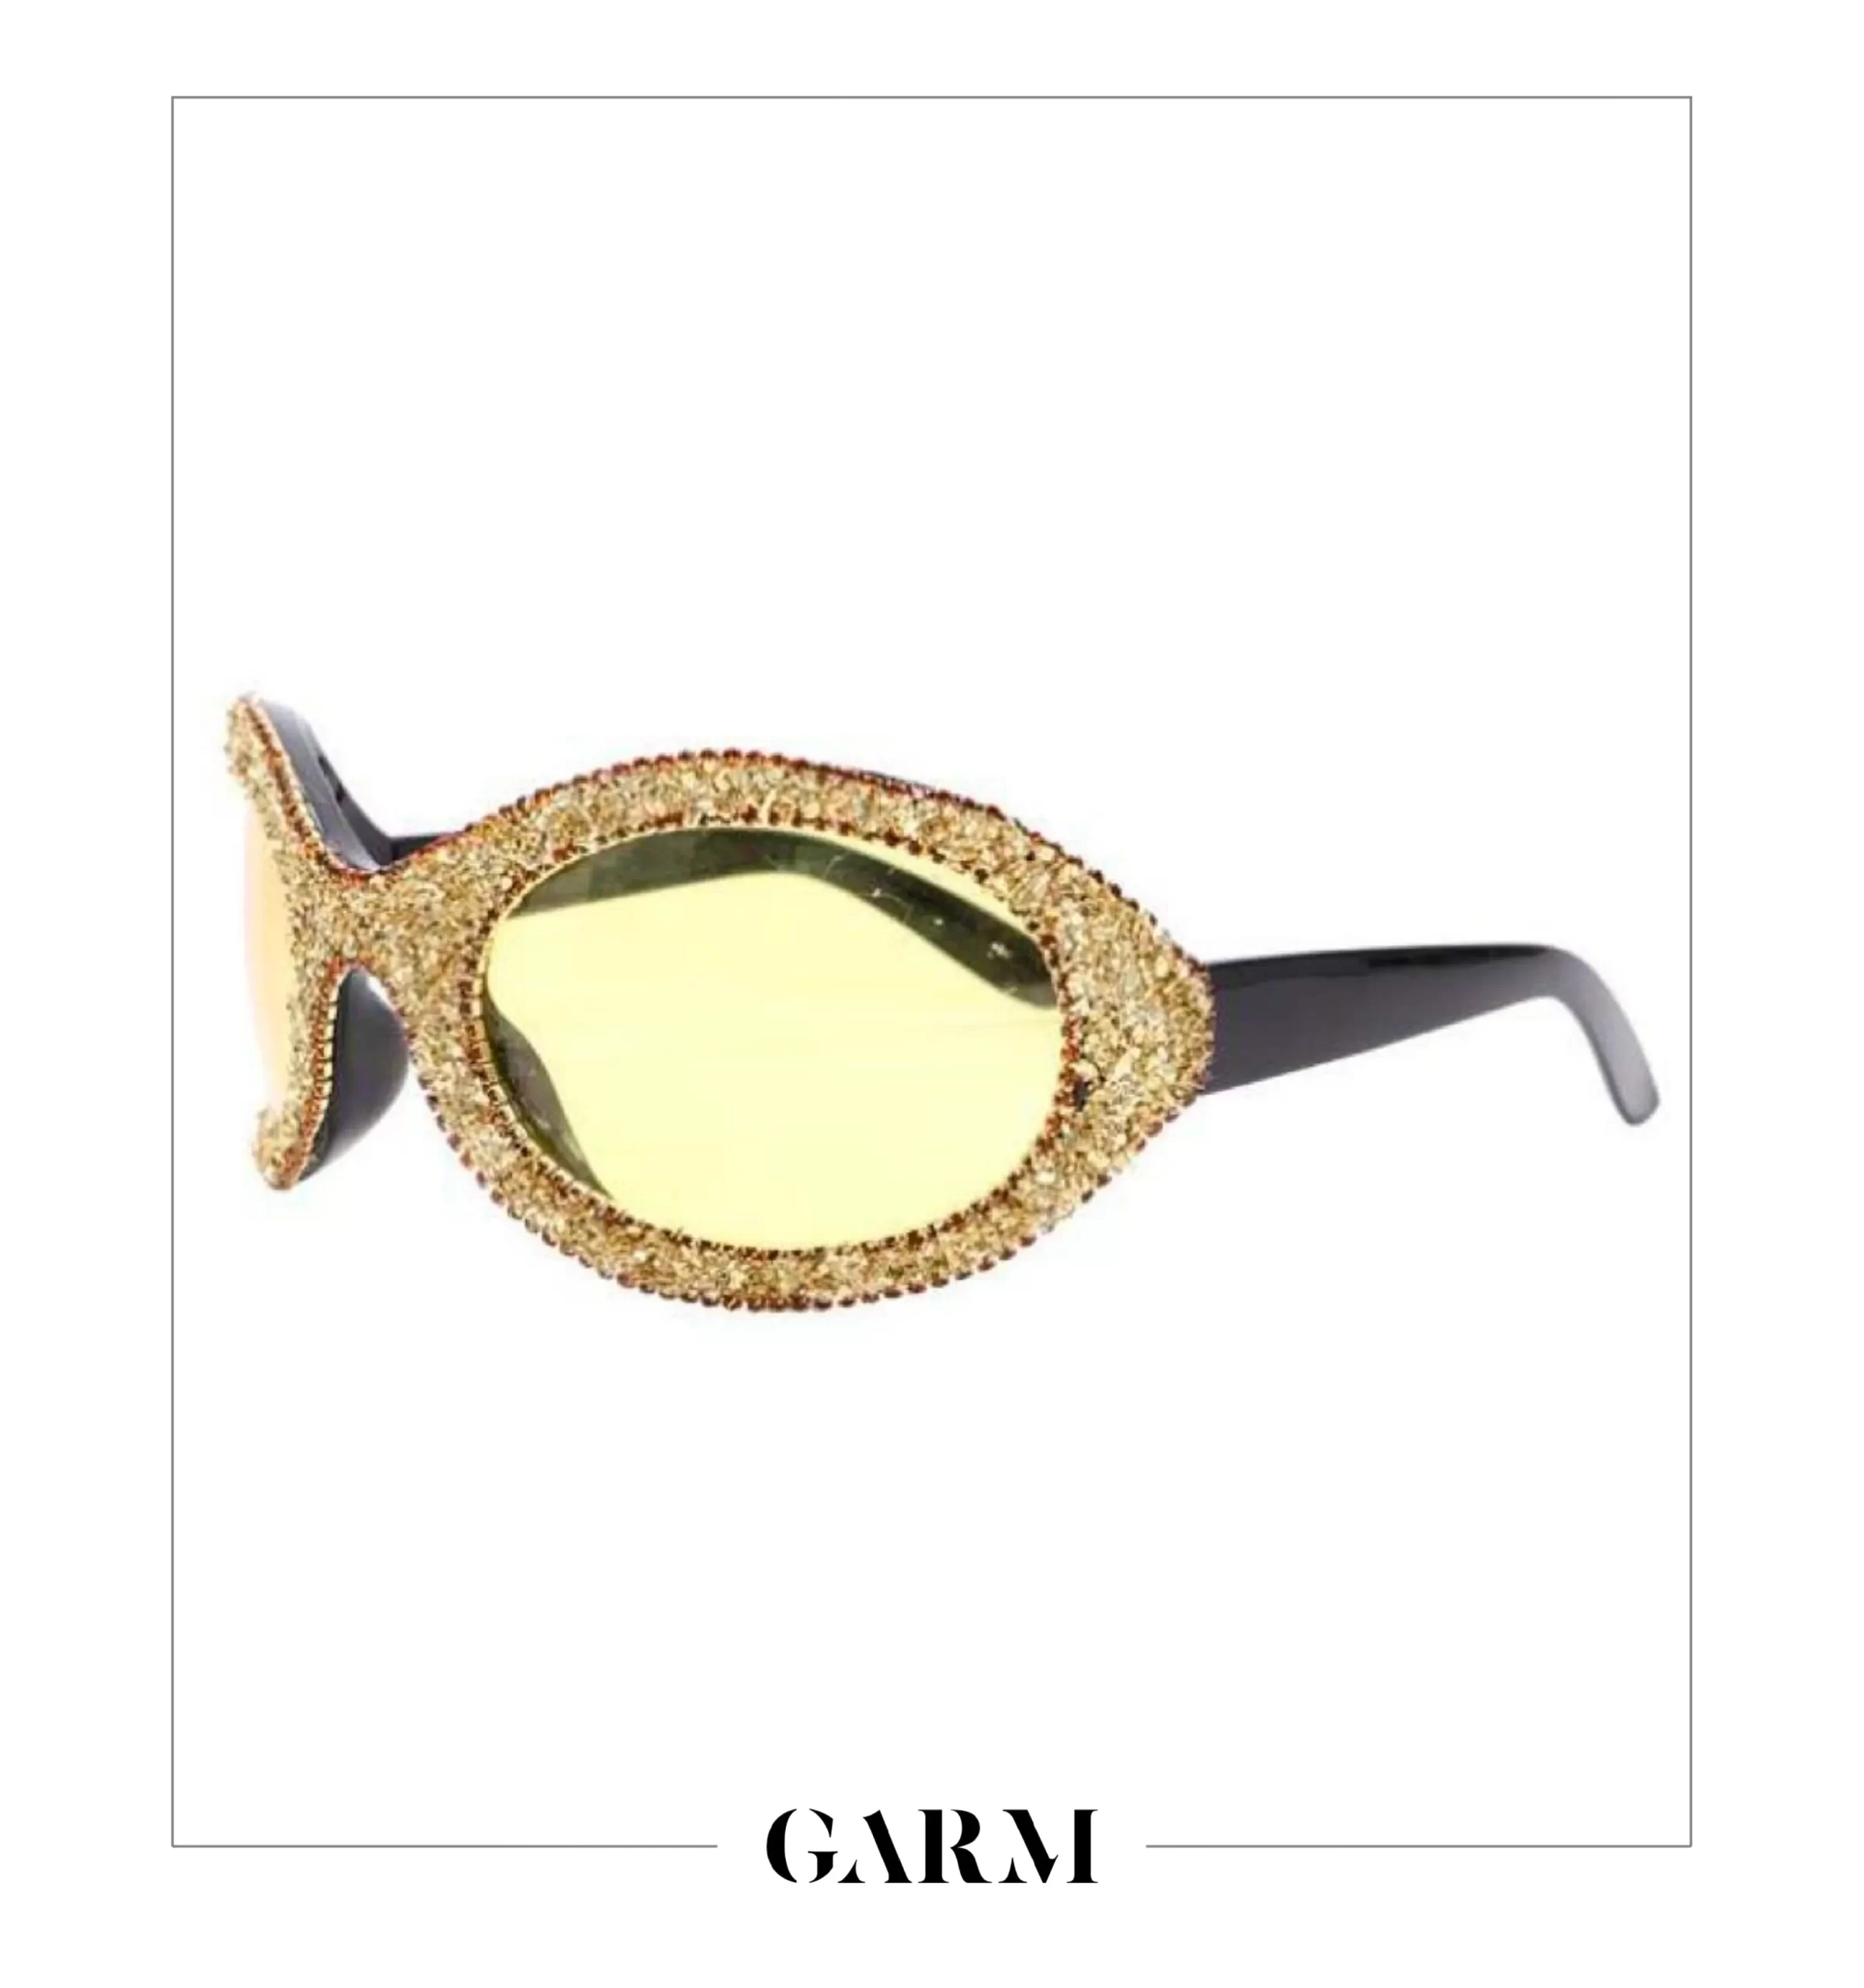 Hand-made in Africa, the Gold Y2K Crystal Shades by 1941 are available on on Garm